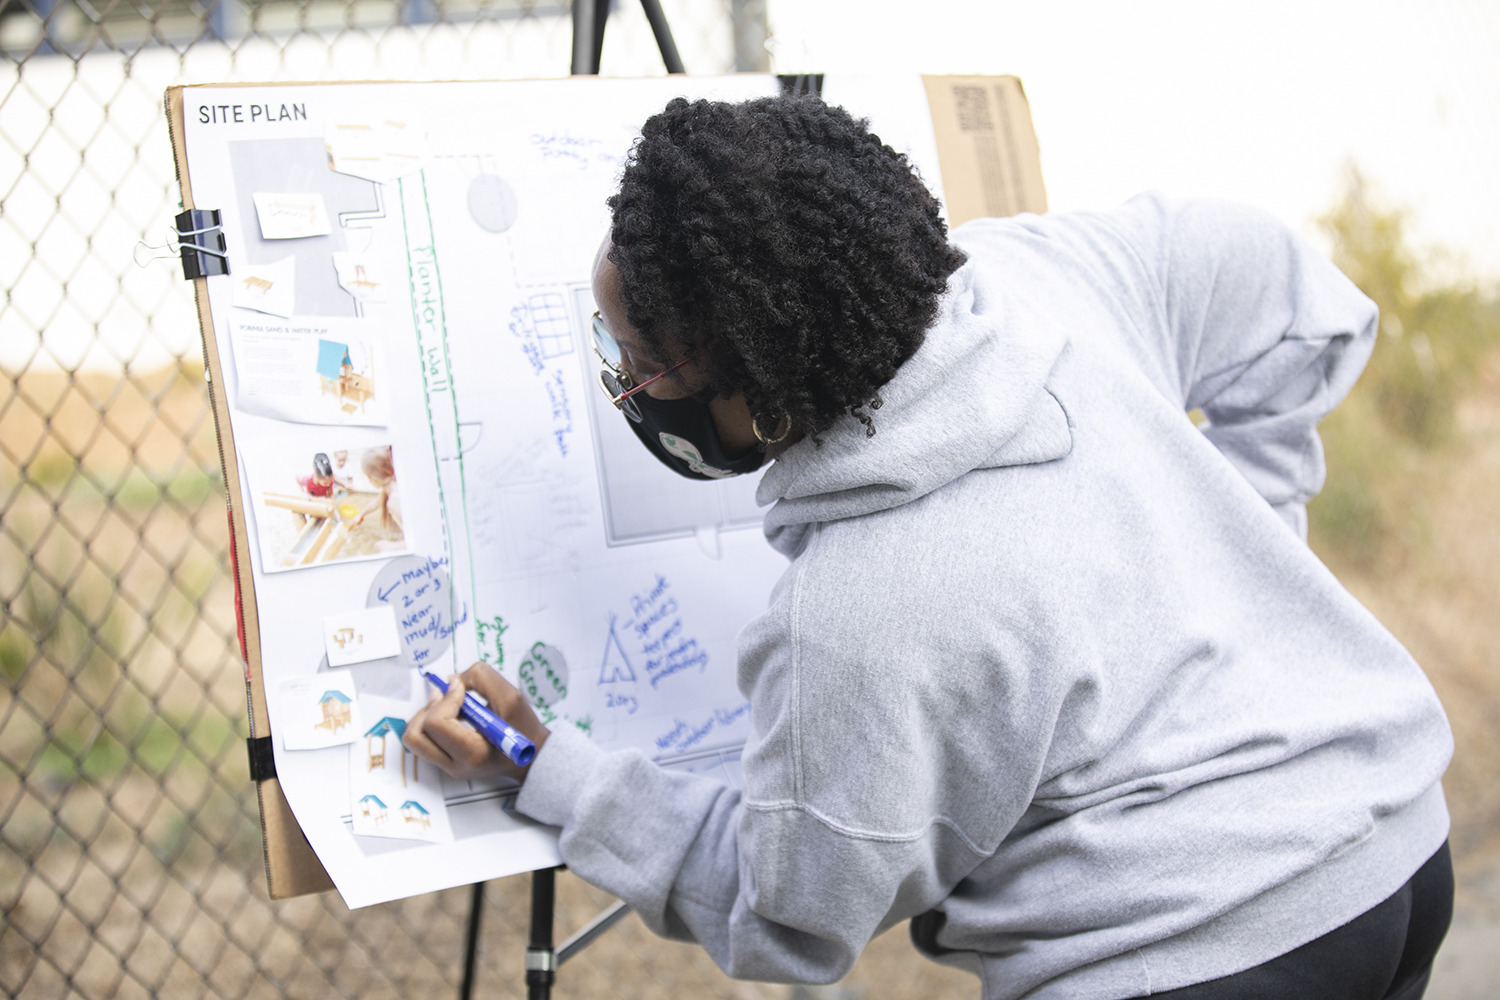 woman writing feedback on a board at a community meeting with architects